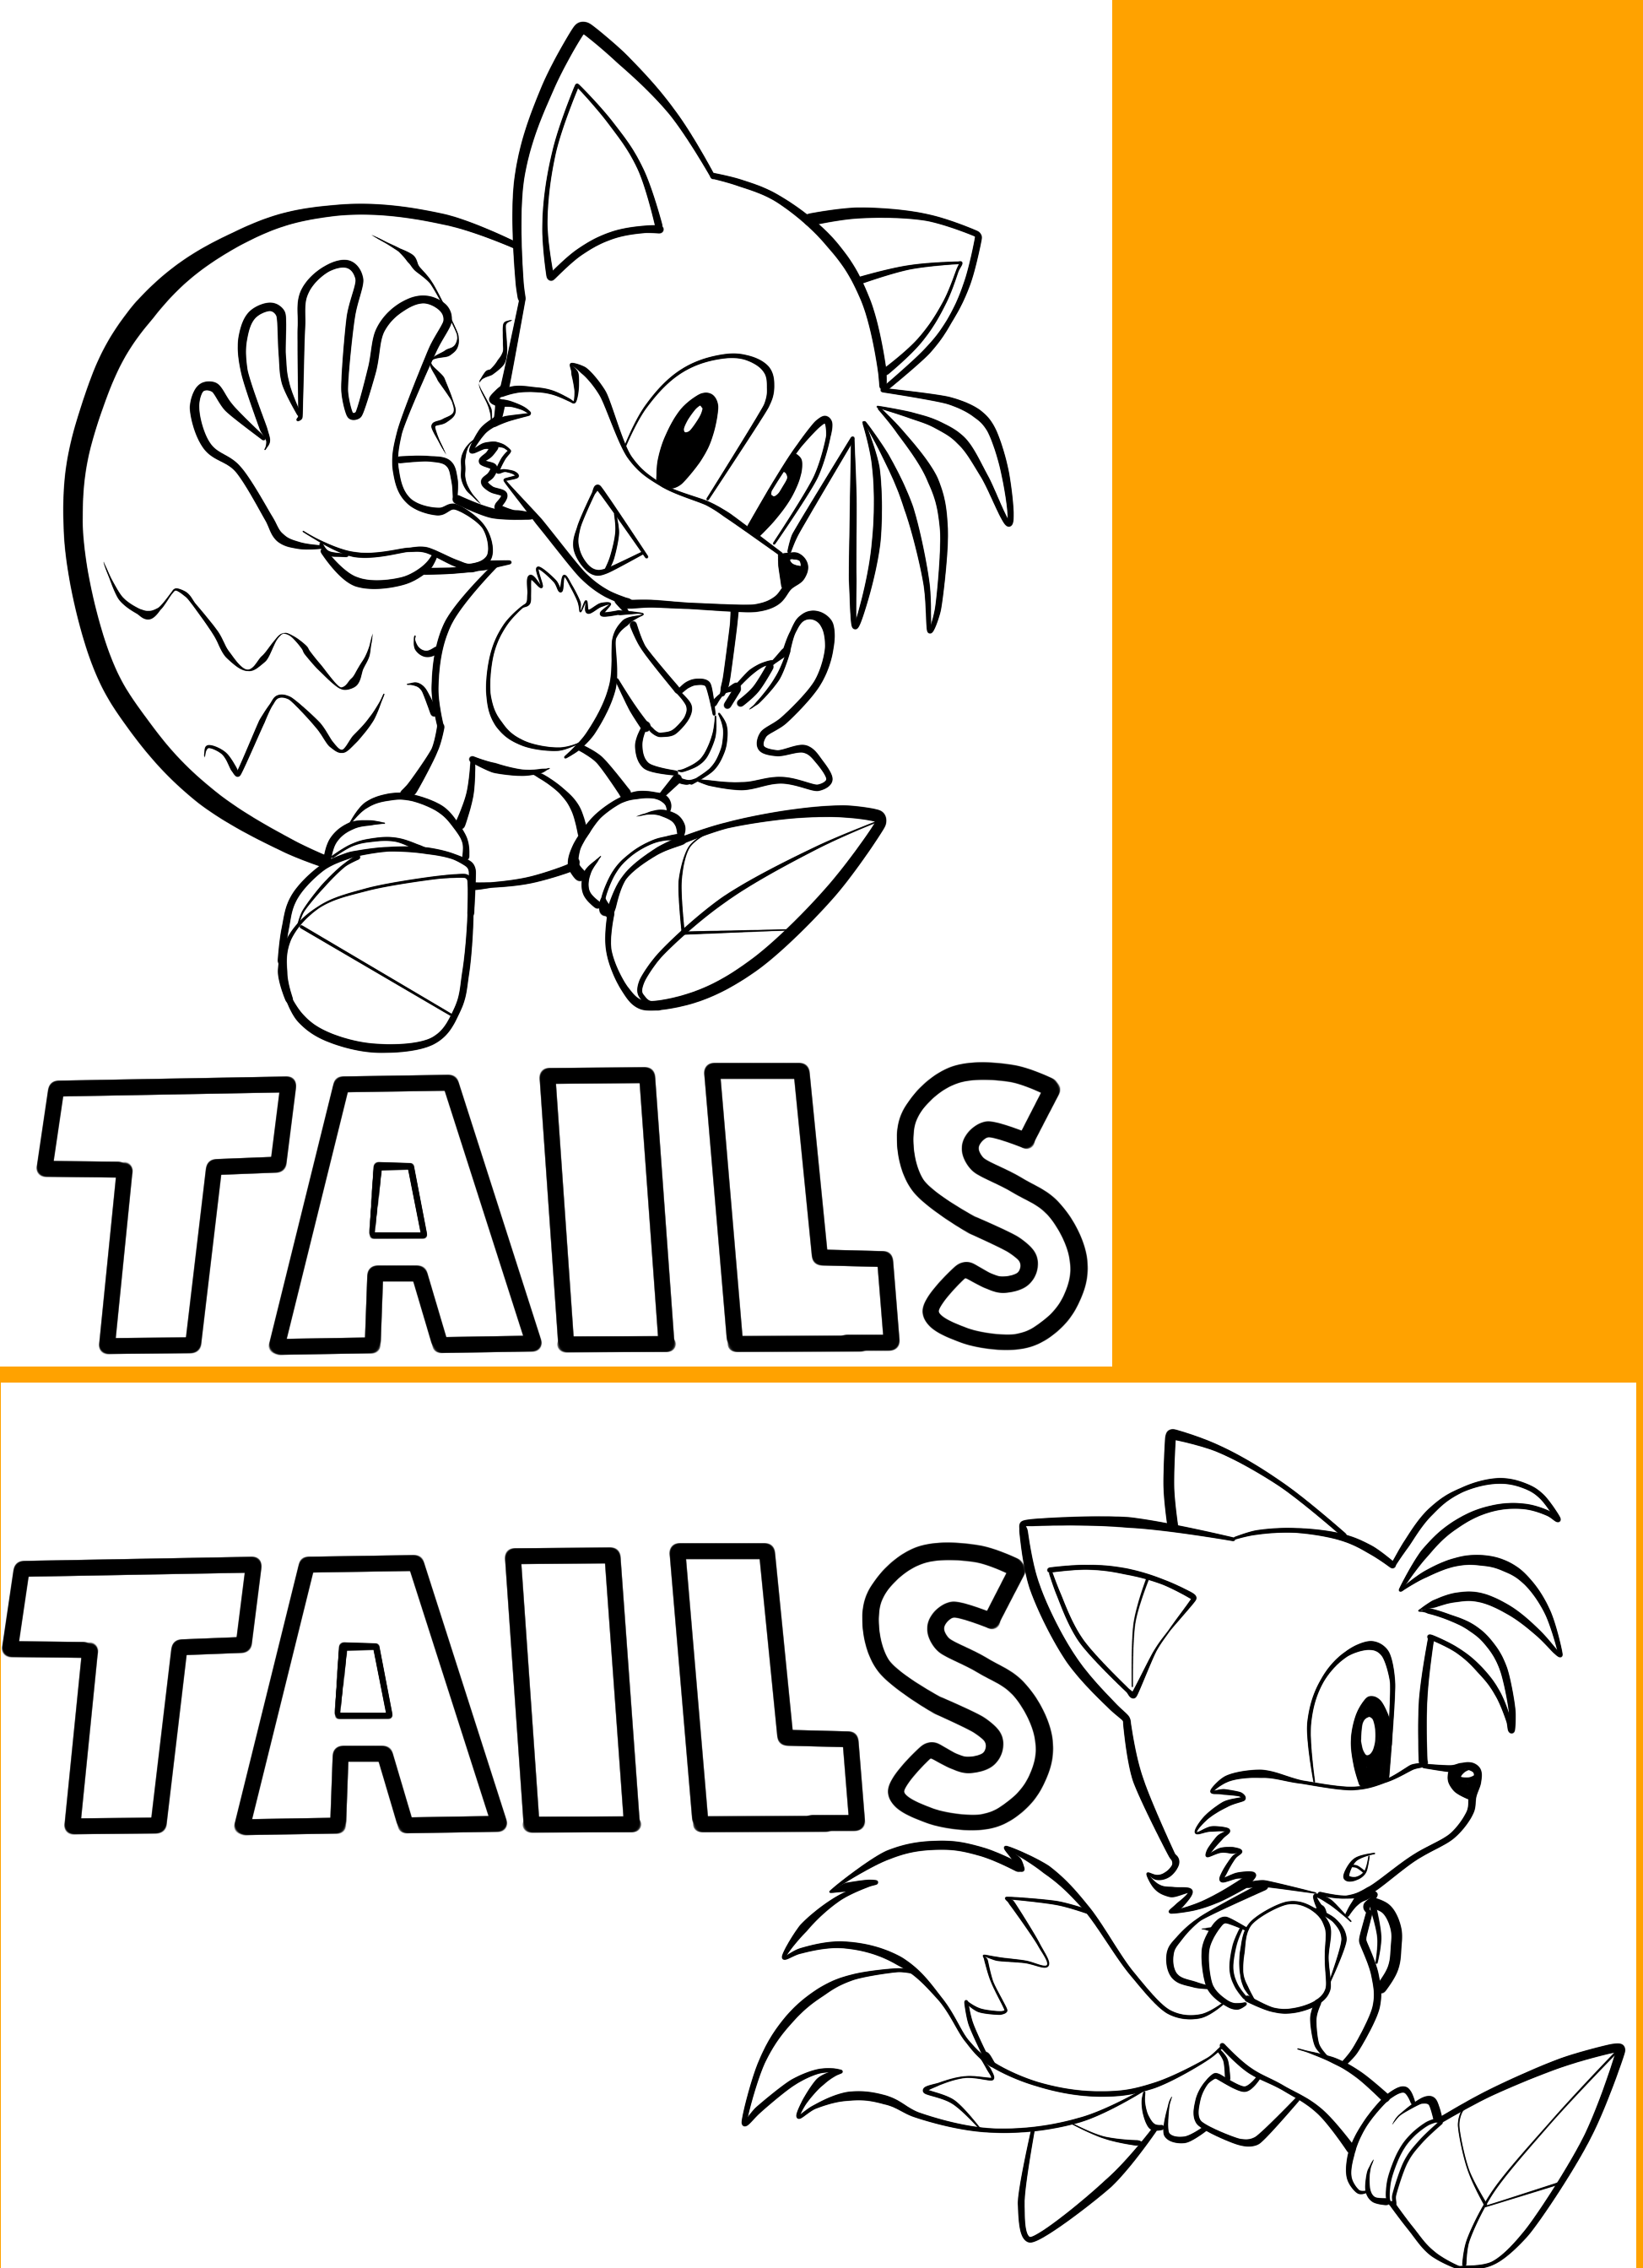 Downloadable Classic Tails Coloring Pages by FayeleneFyre on DeviantArt